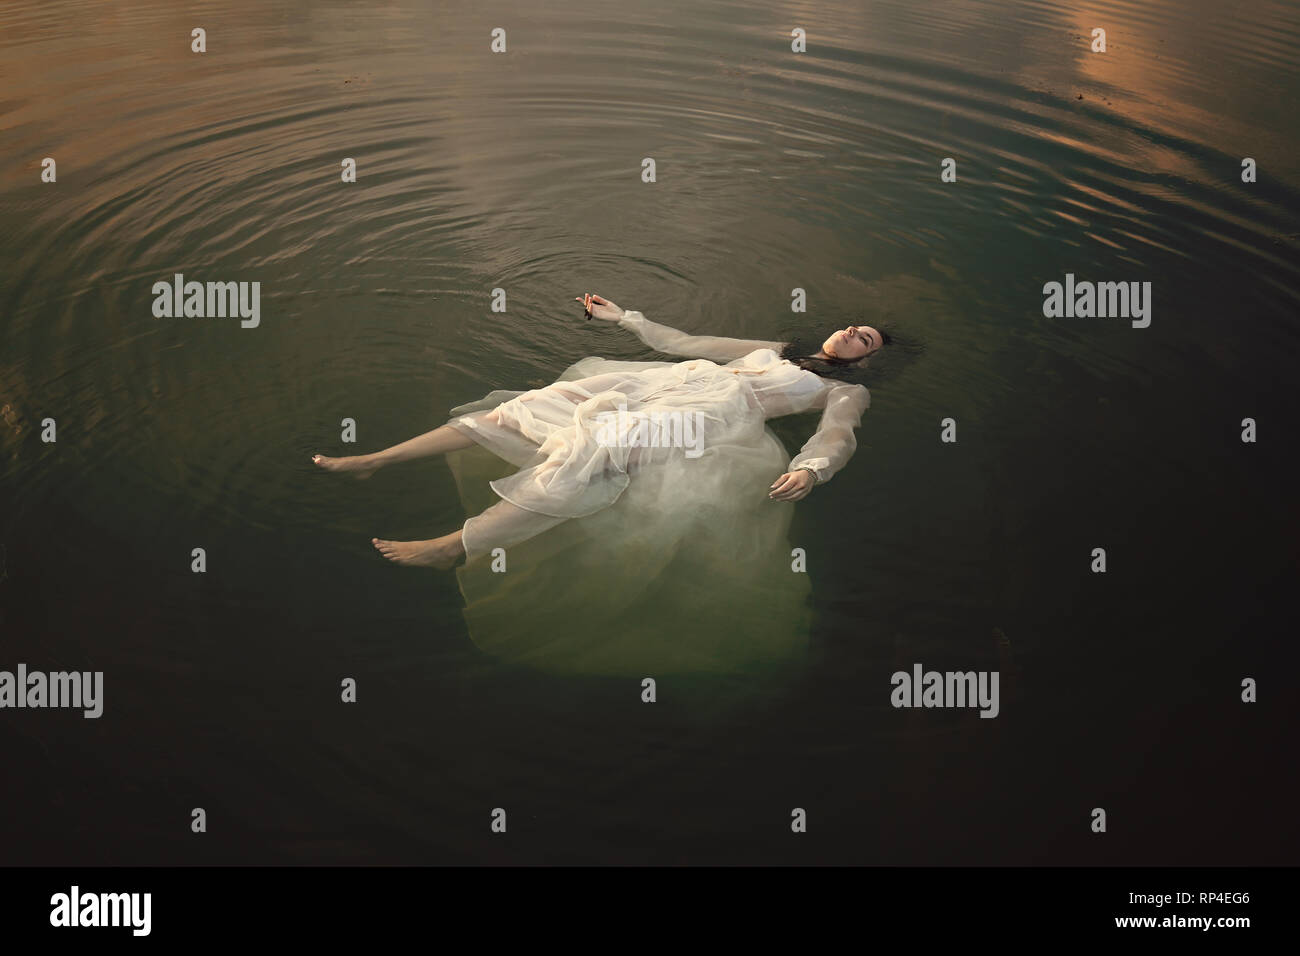 Young woman lying dead in lake waters Stock Photo